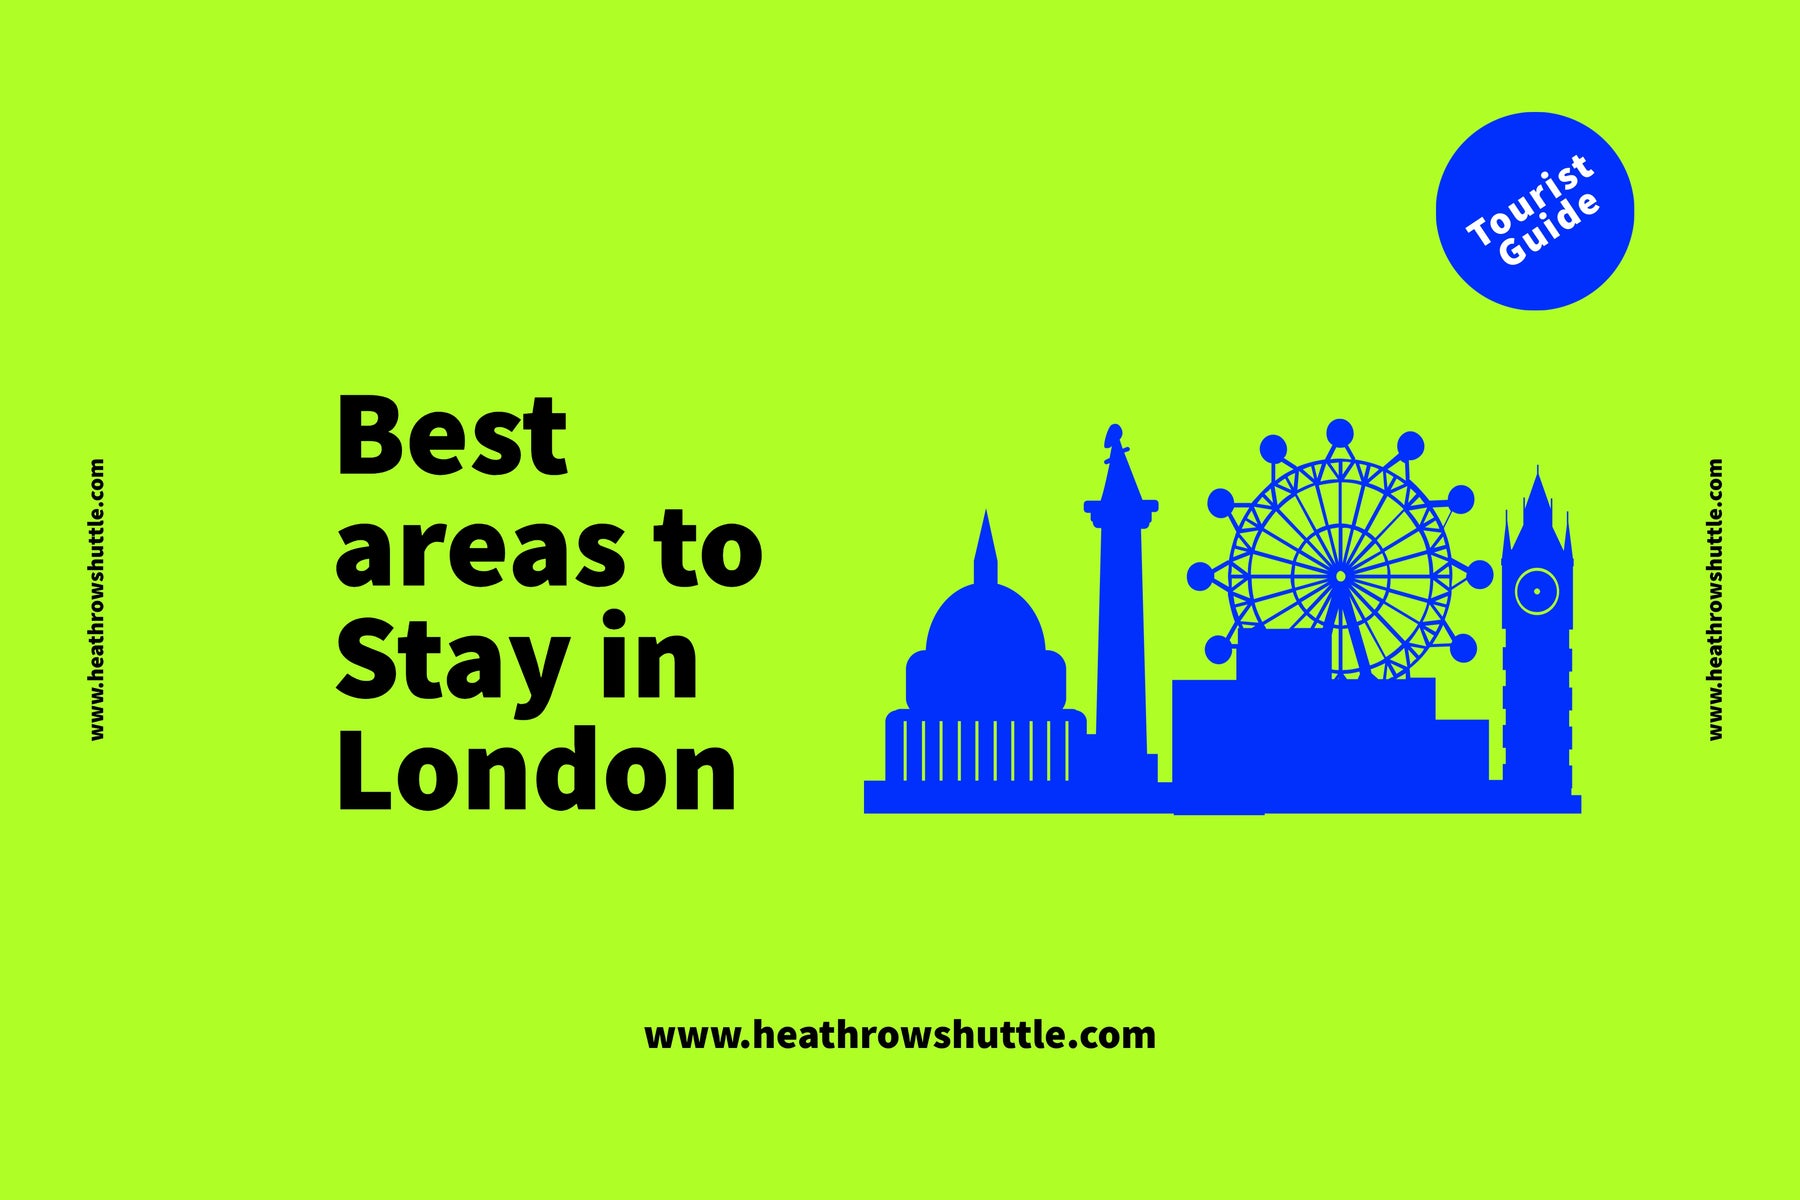 areas list of london to stay